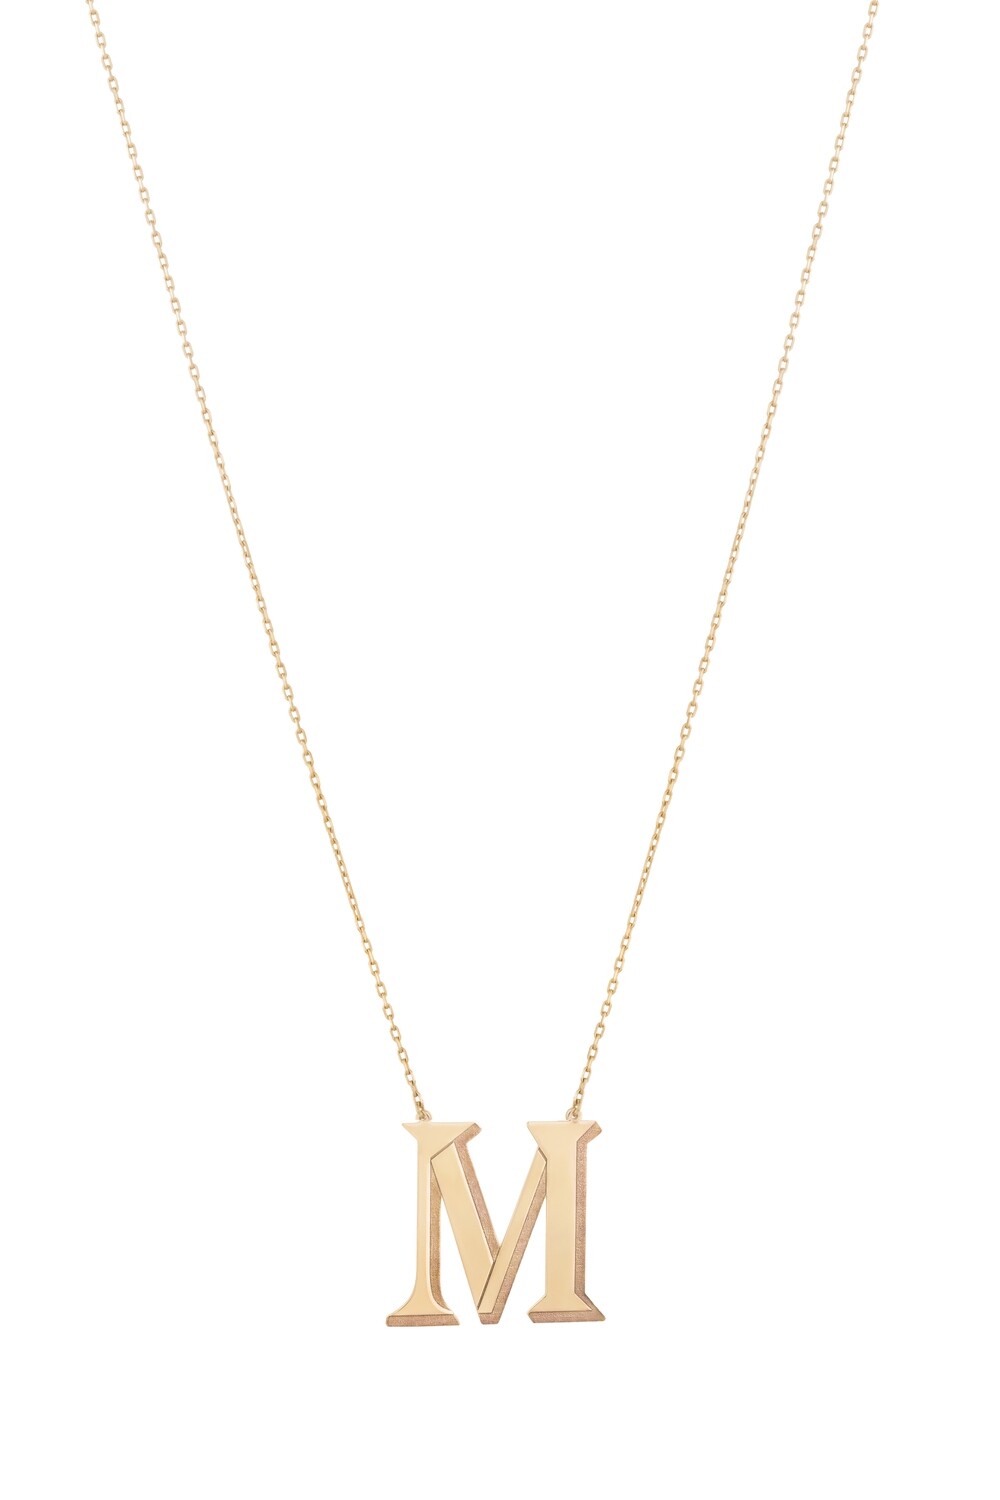 Initials Gold Necklace Letter M